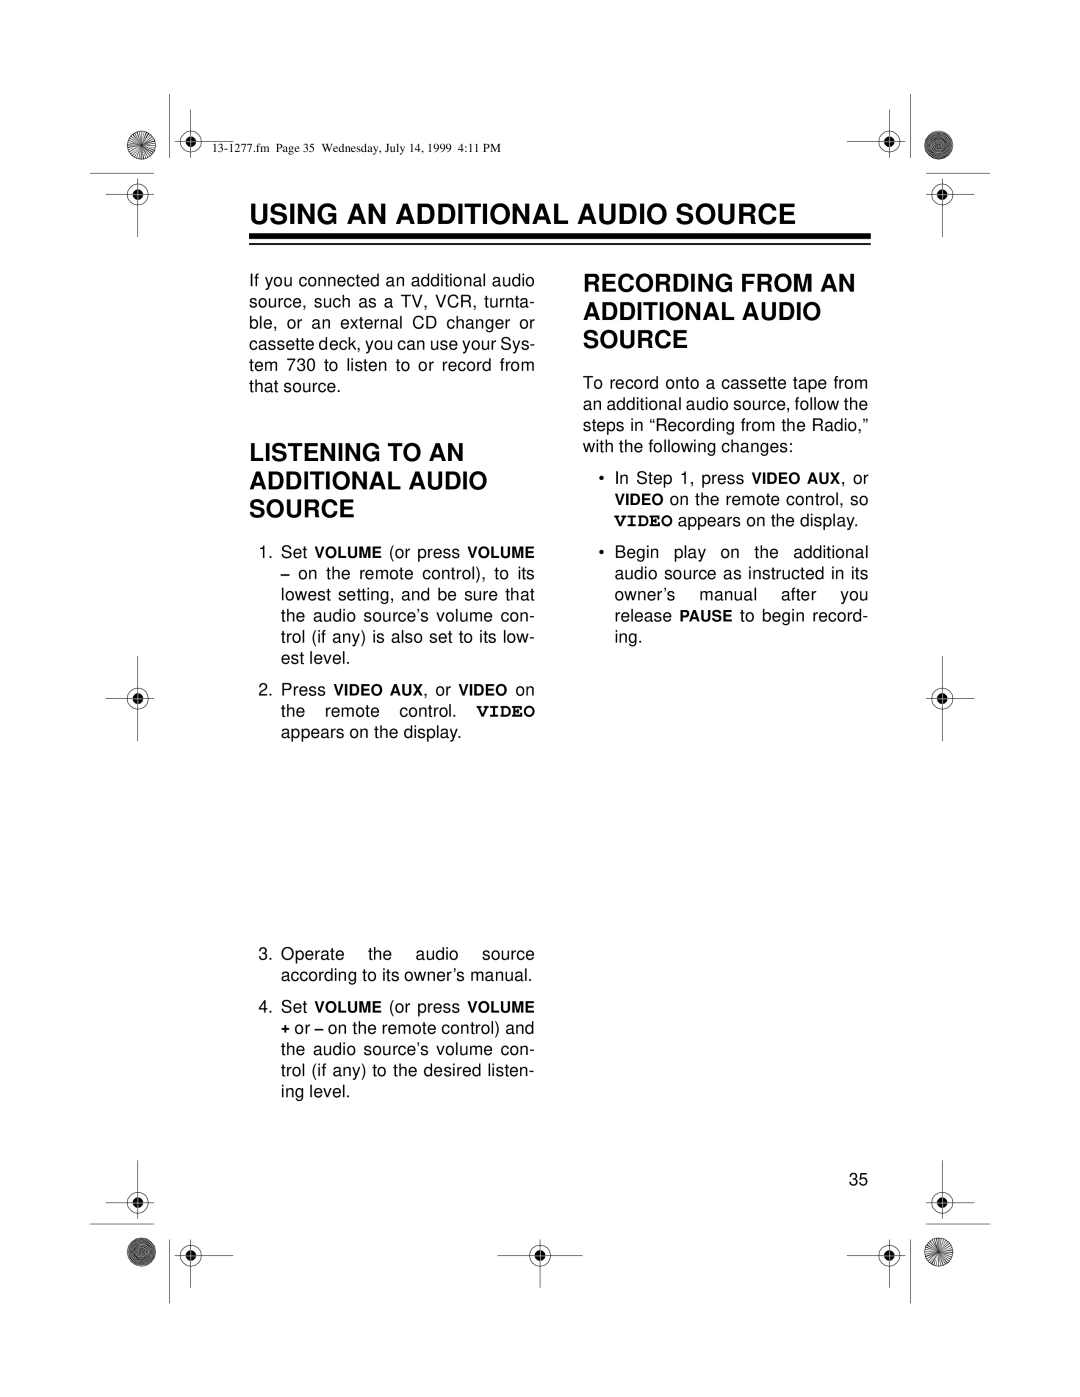 Optimus SYSTEM 730 owner manual Using An Additional Audio Source, Listening To An Additional Audio Source 